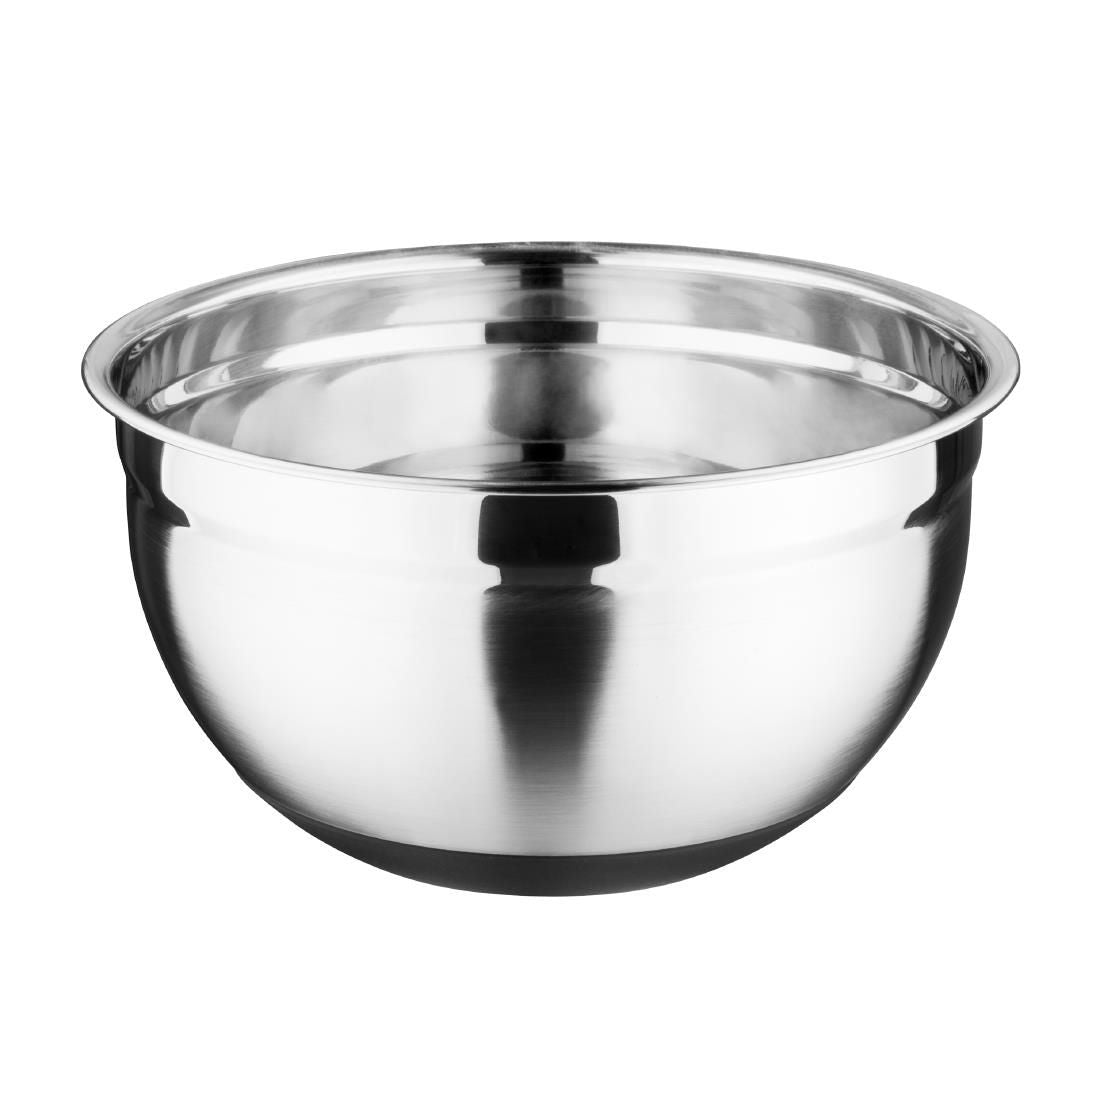 GG022 Vogue Stainless Steel Bowl with Silicone Base 5Ltr JD Catering Equipment Solutions Ltd